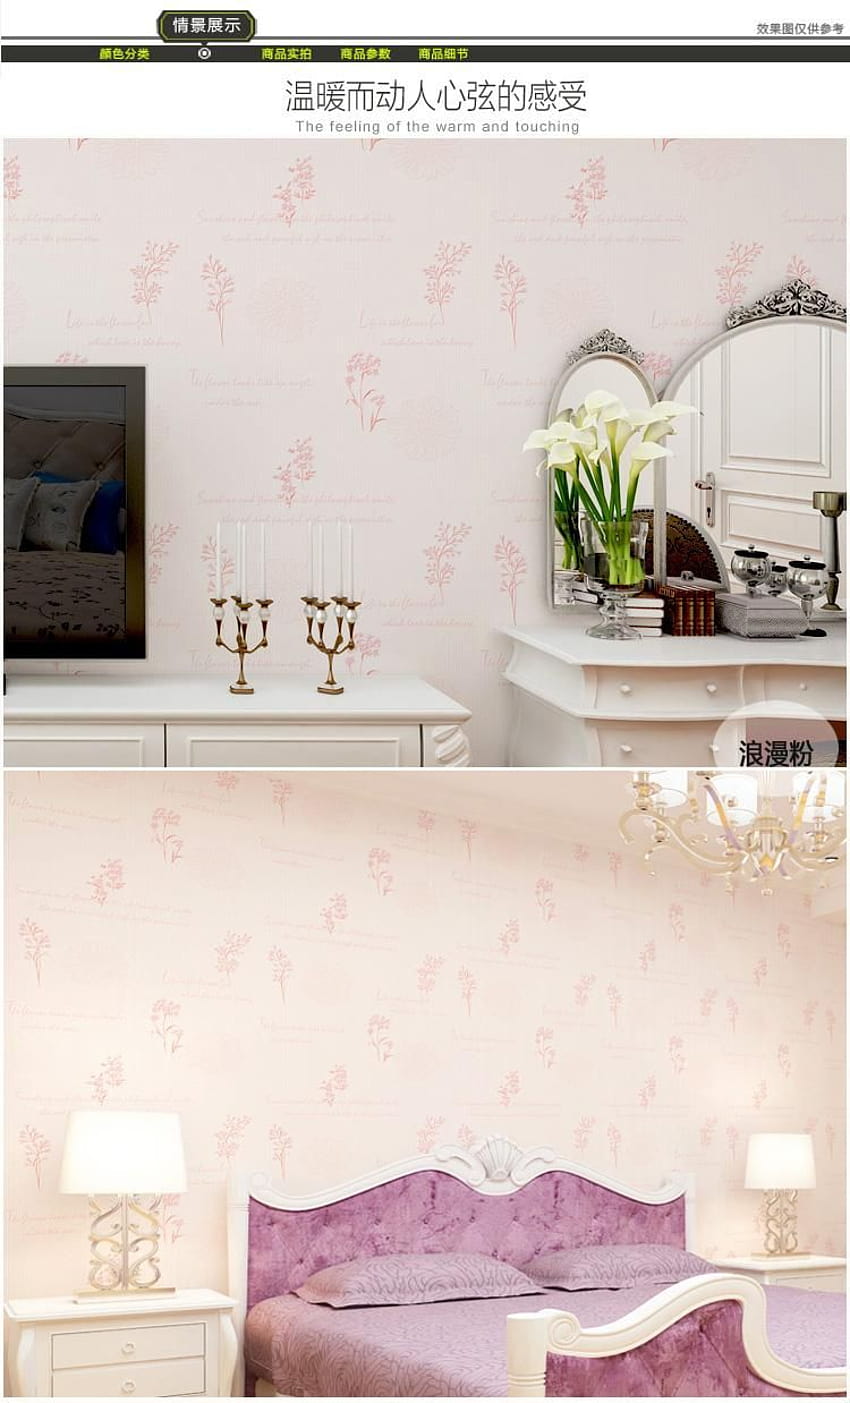 New Korean Pastoral Flower Pink Fresh Romantic Warm Three Dimensional Non Woven Bedroom Living Room TV Backgrounds Home Wall Paper From Chenqiyi, $9.05 HD phone wallpaper